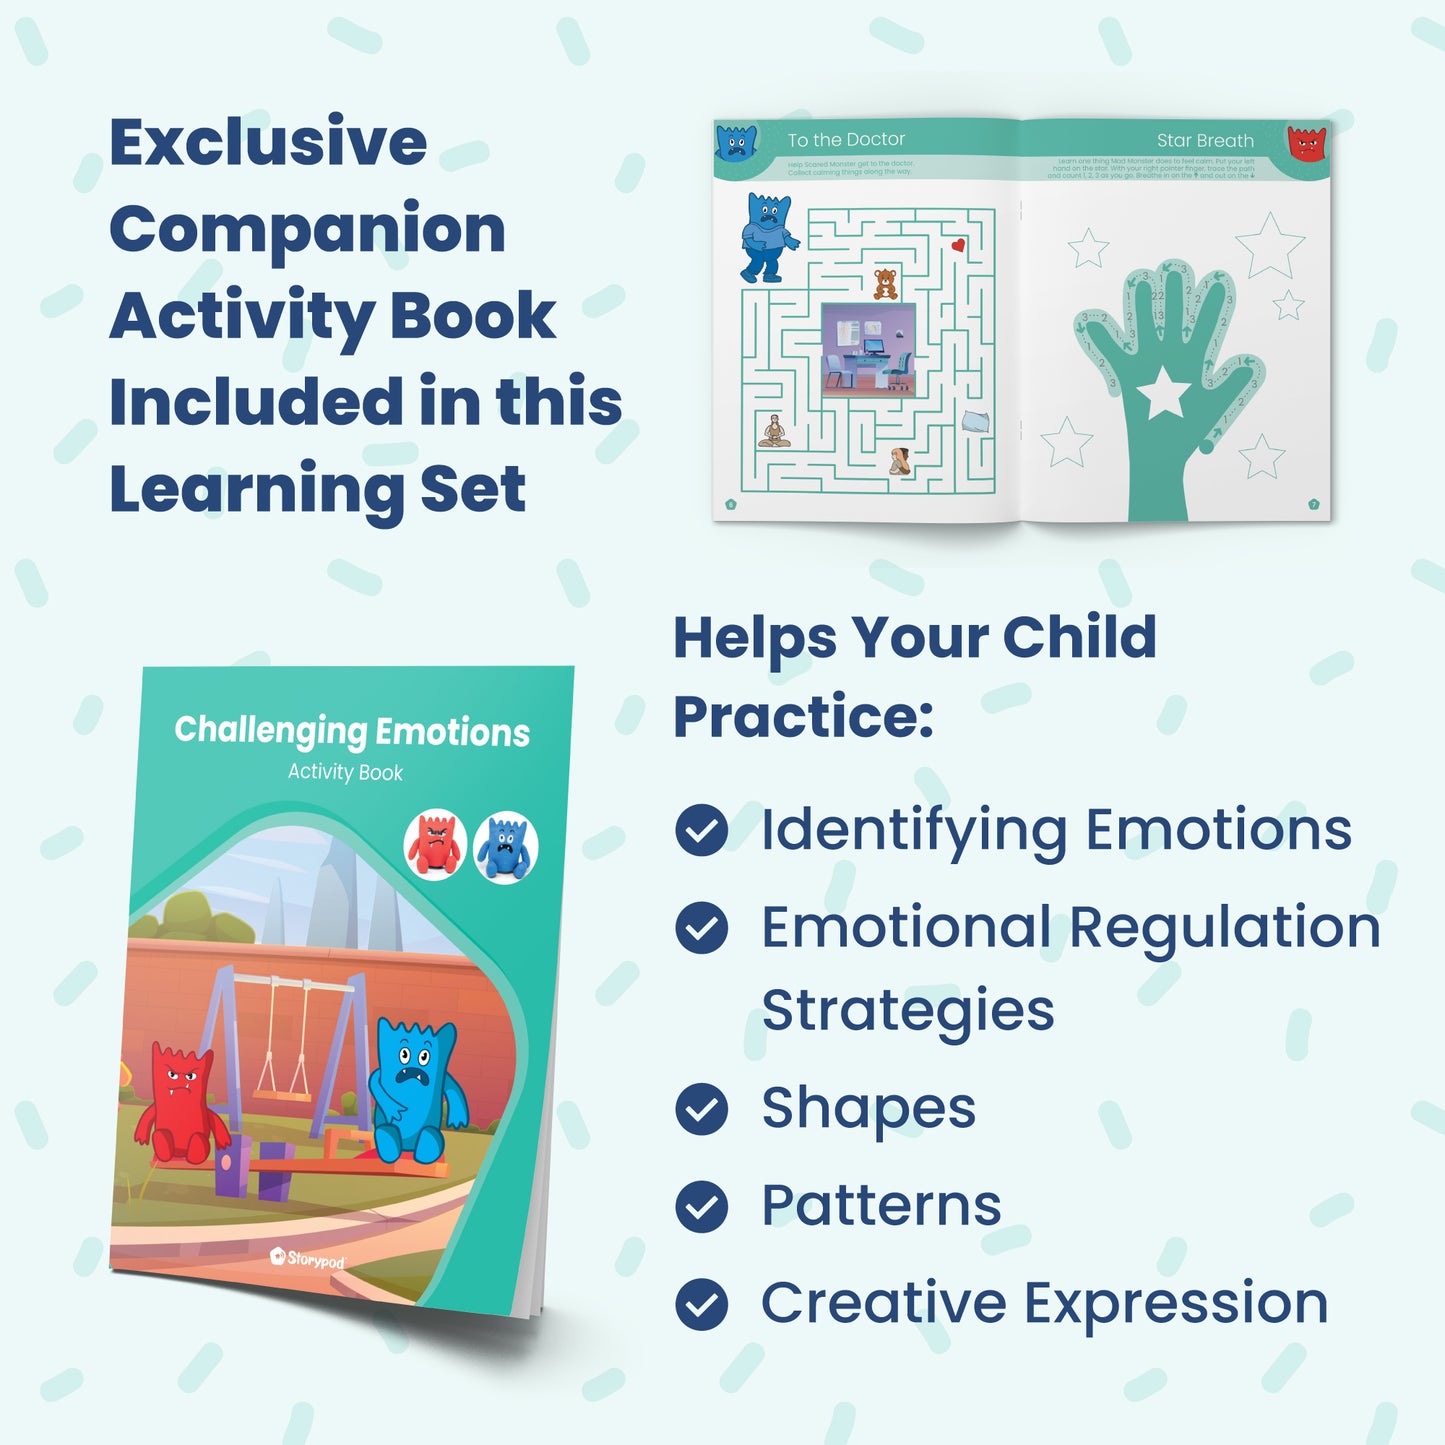 Challenging Emotions Learning Set